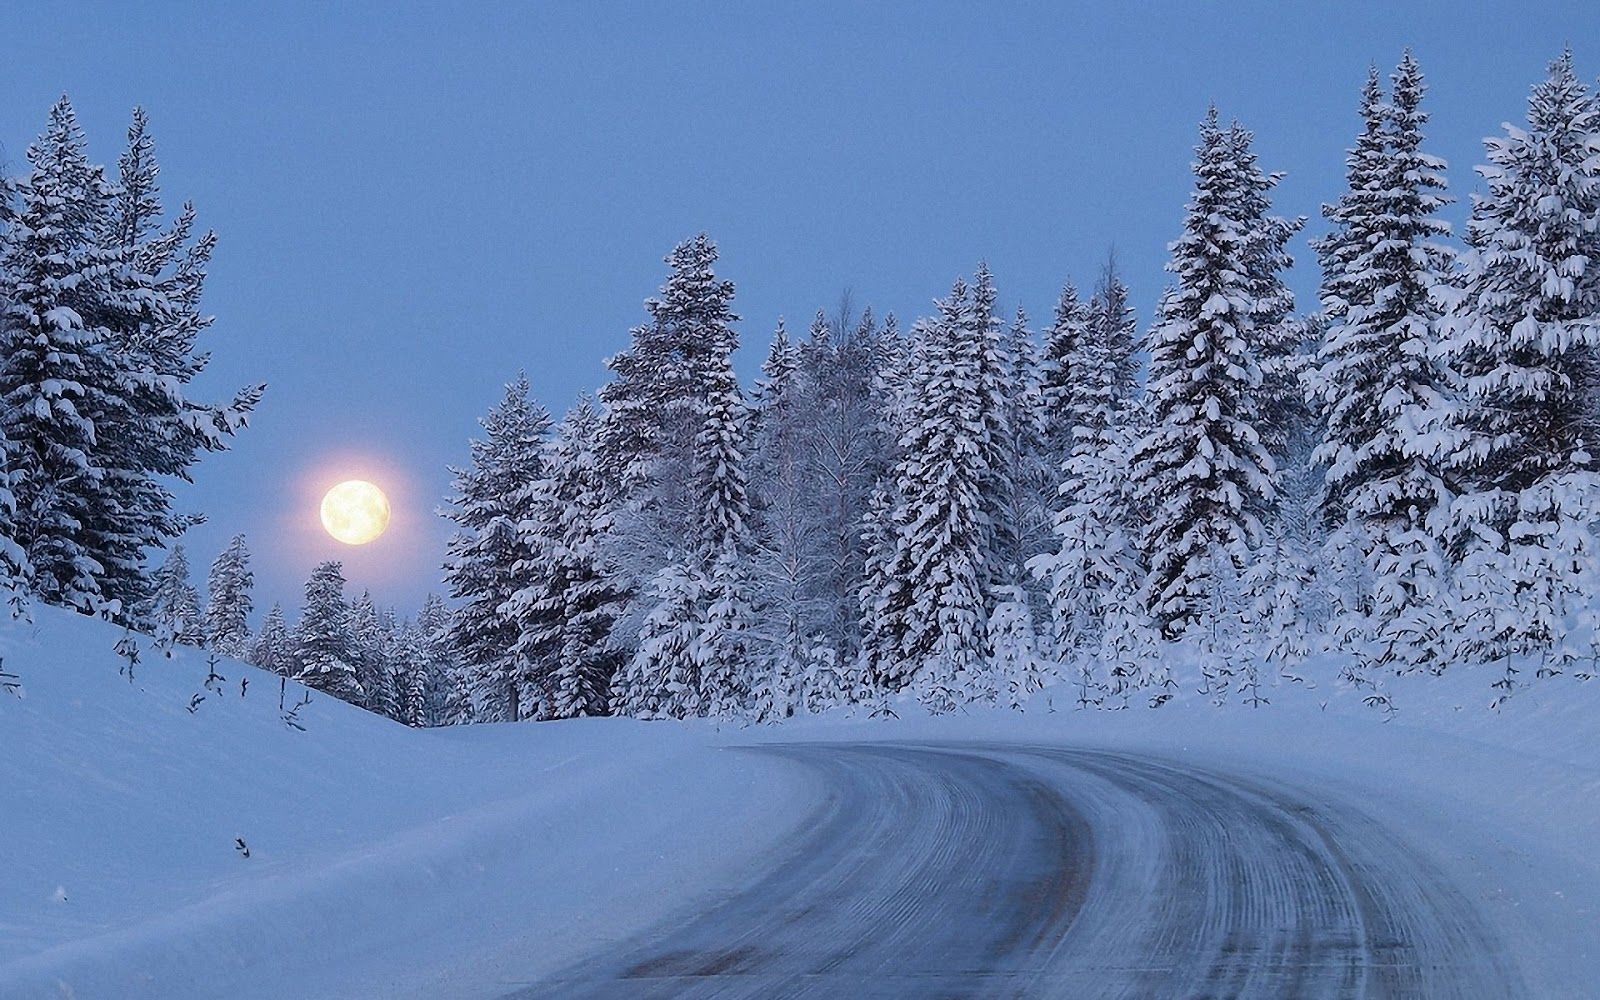 Snow during the Full Moon. Winter wallpaper, Winter scenery, Nature wallpaper